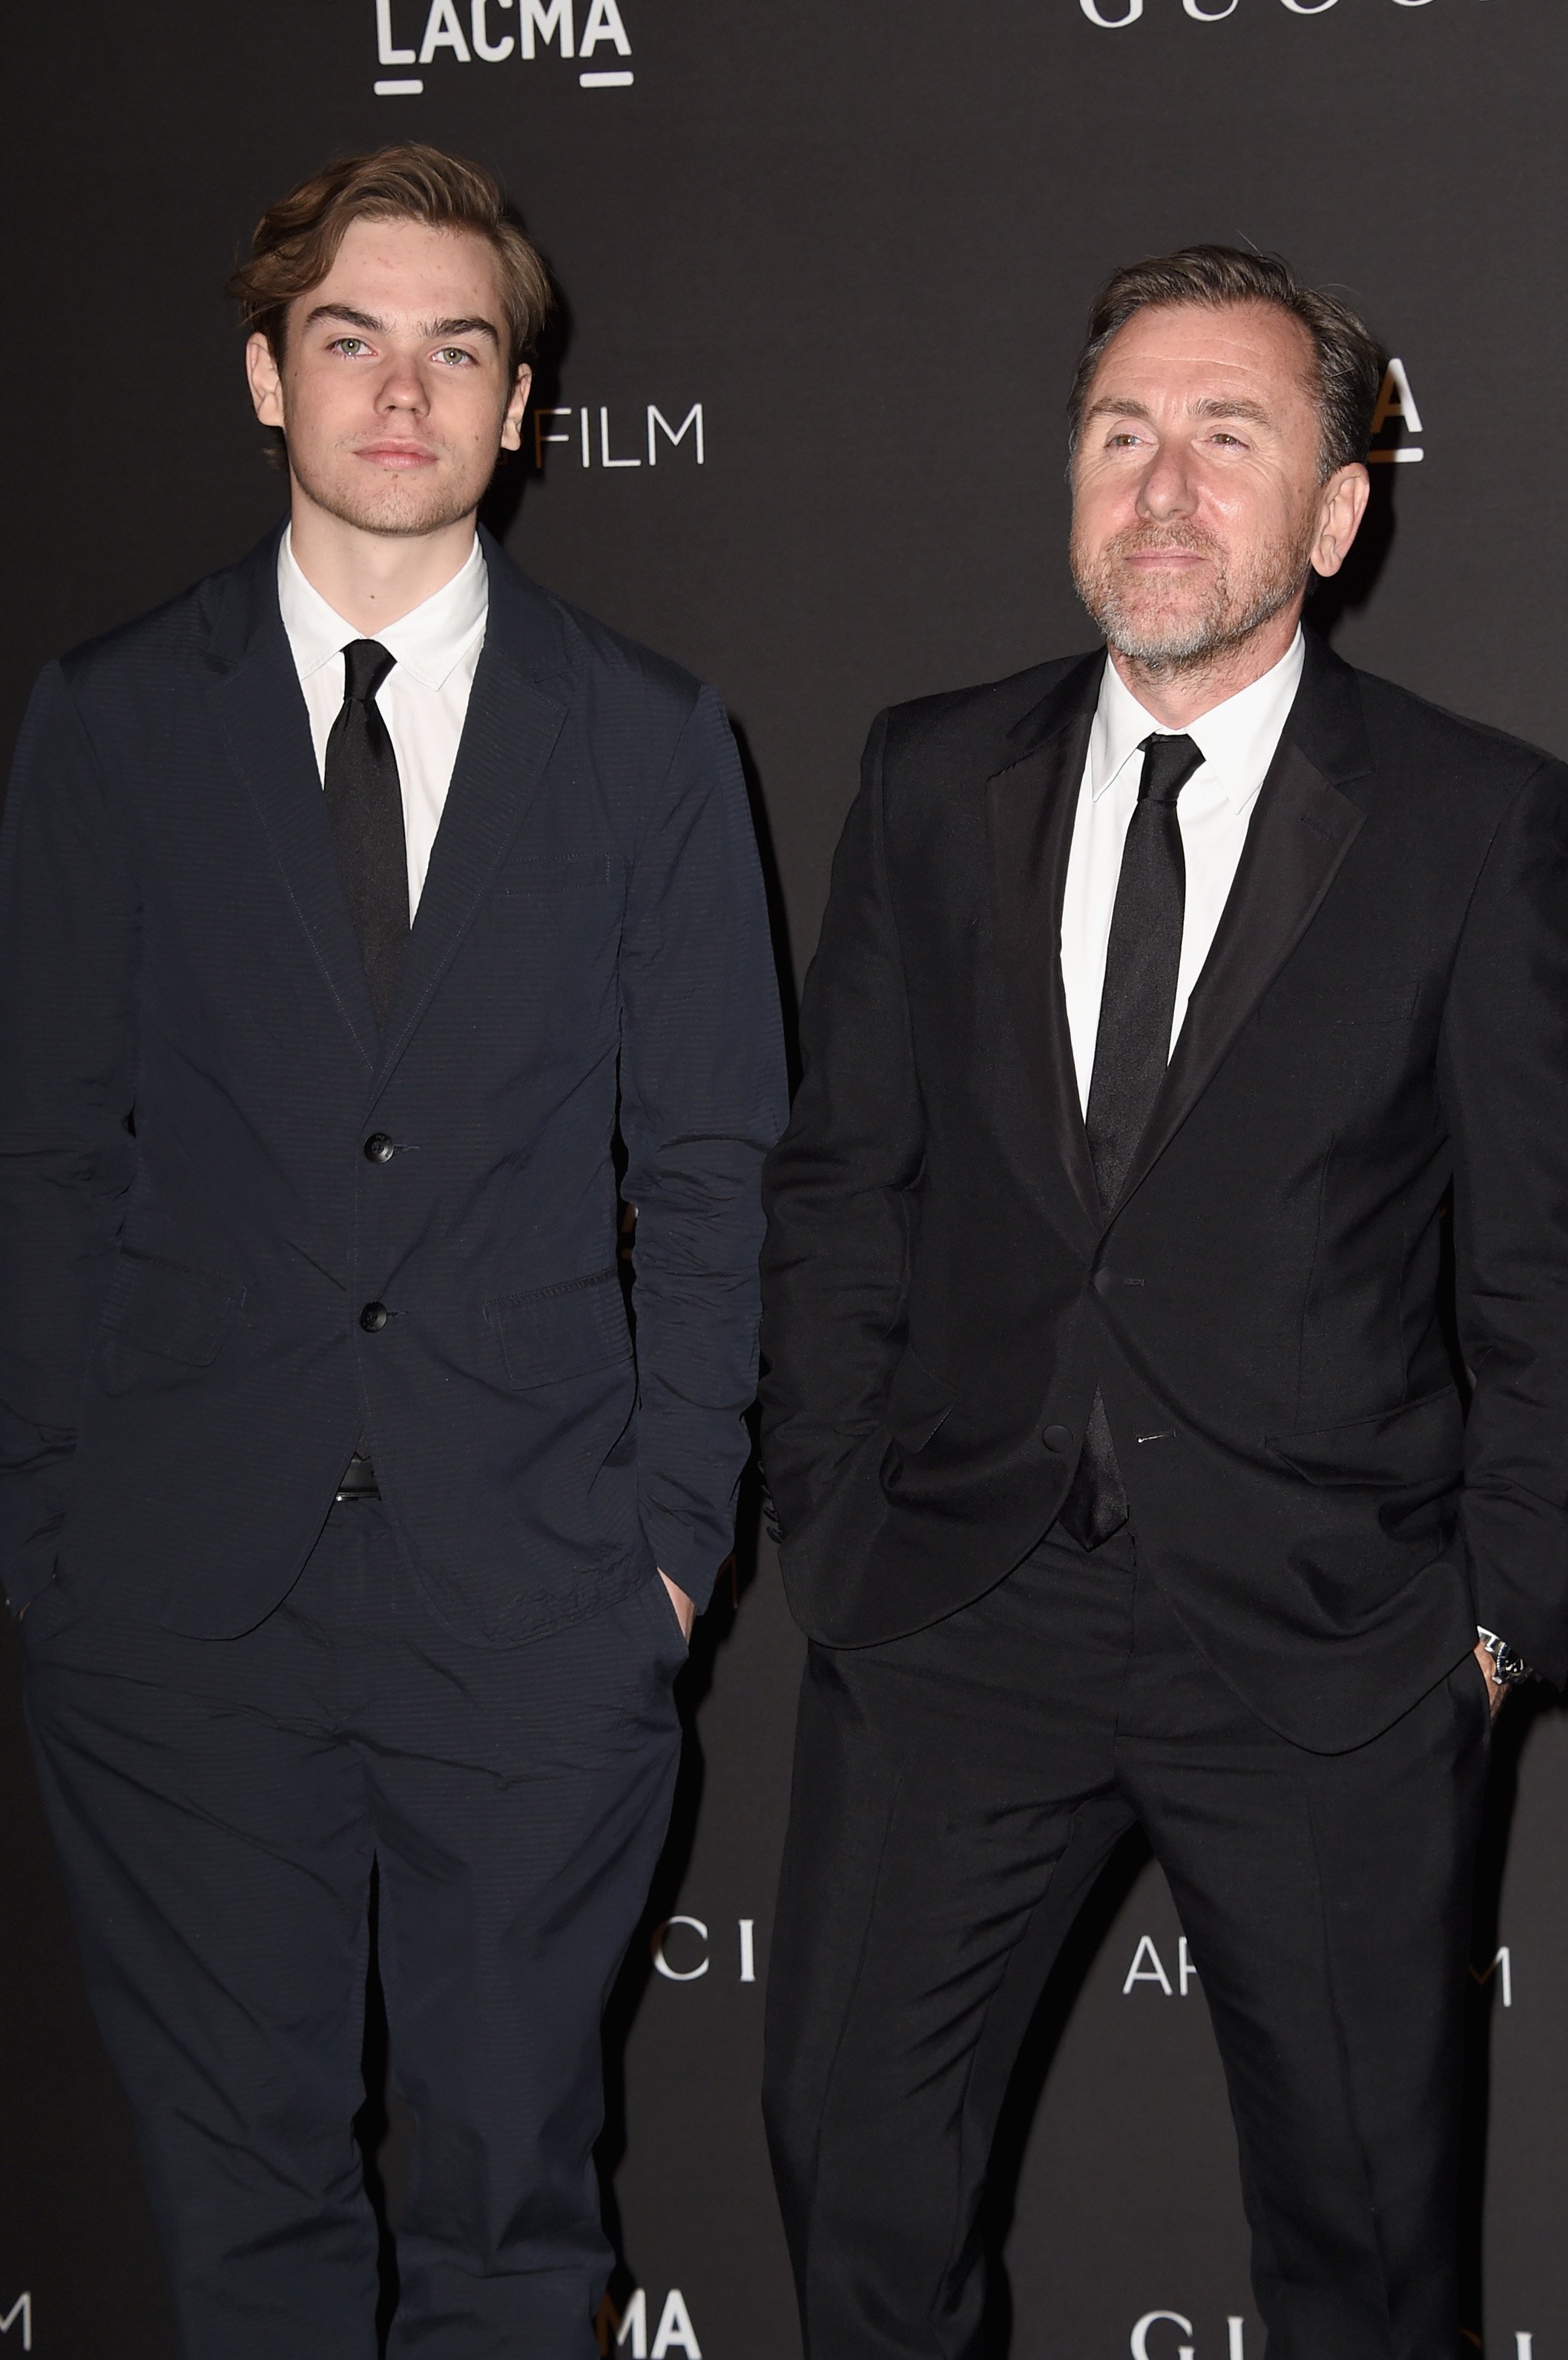 Actor Tim Roth (R) and Cormac Roth at LACMA on November 1, 2014 in Los Angeles, California. | Source: Getty Images